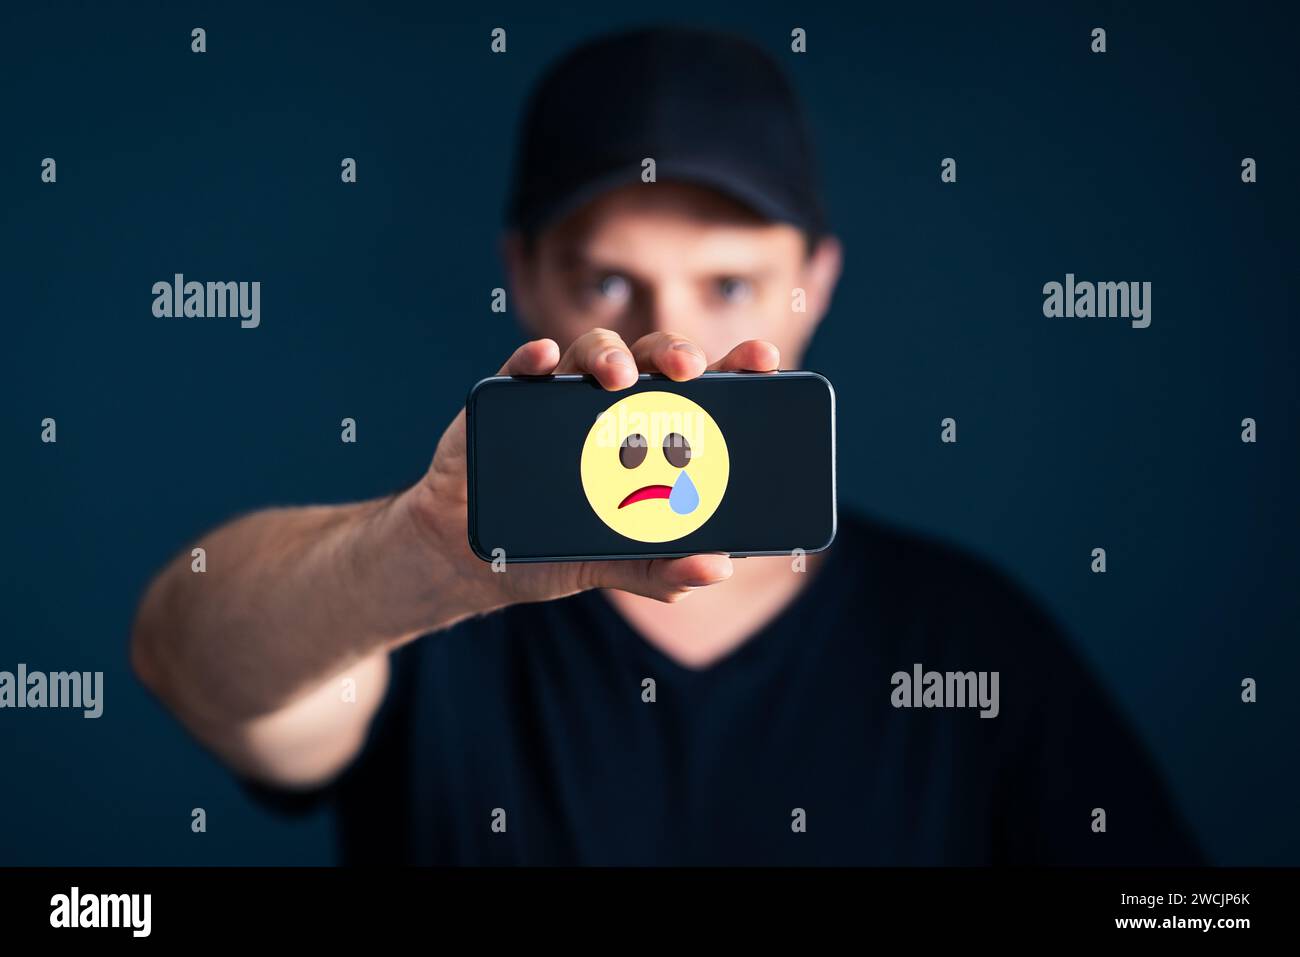 Sad unhappy emotion icon in phone. Depressed lonely man with smartphone. Online hate, trauma, cyber bullying or social media pressure concept. Stock Photo